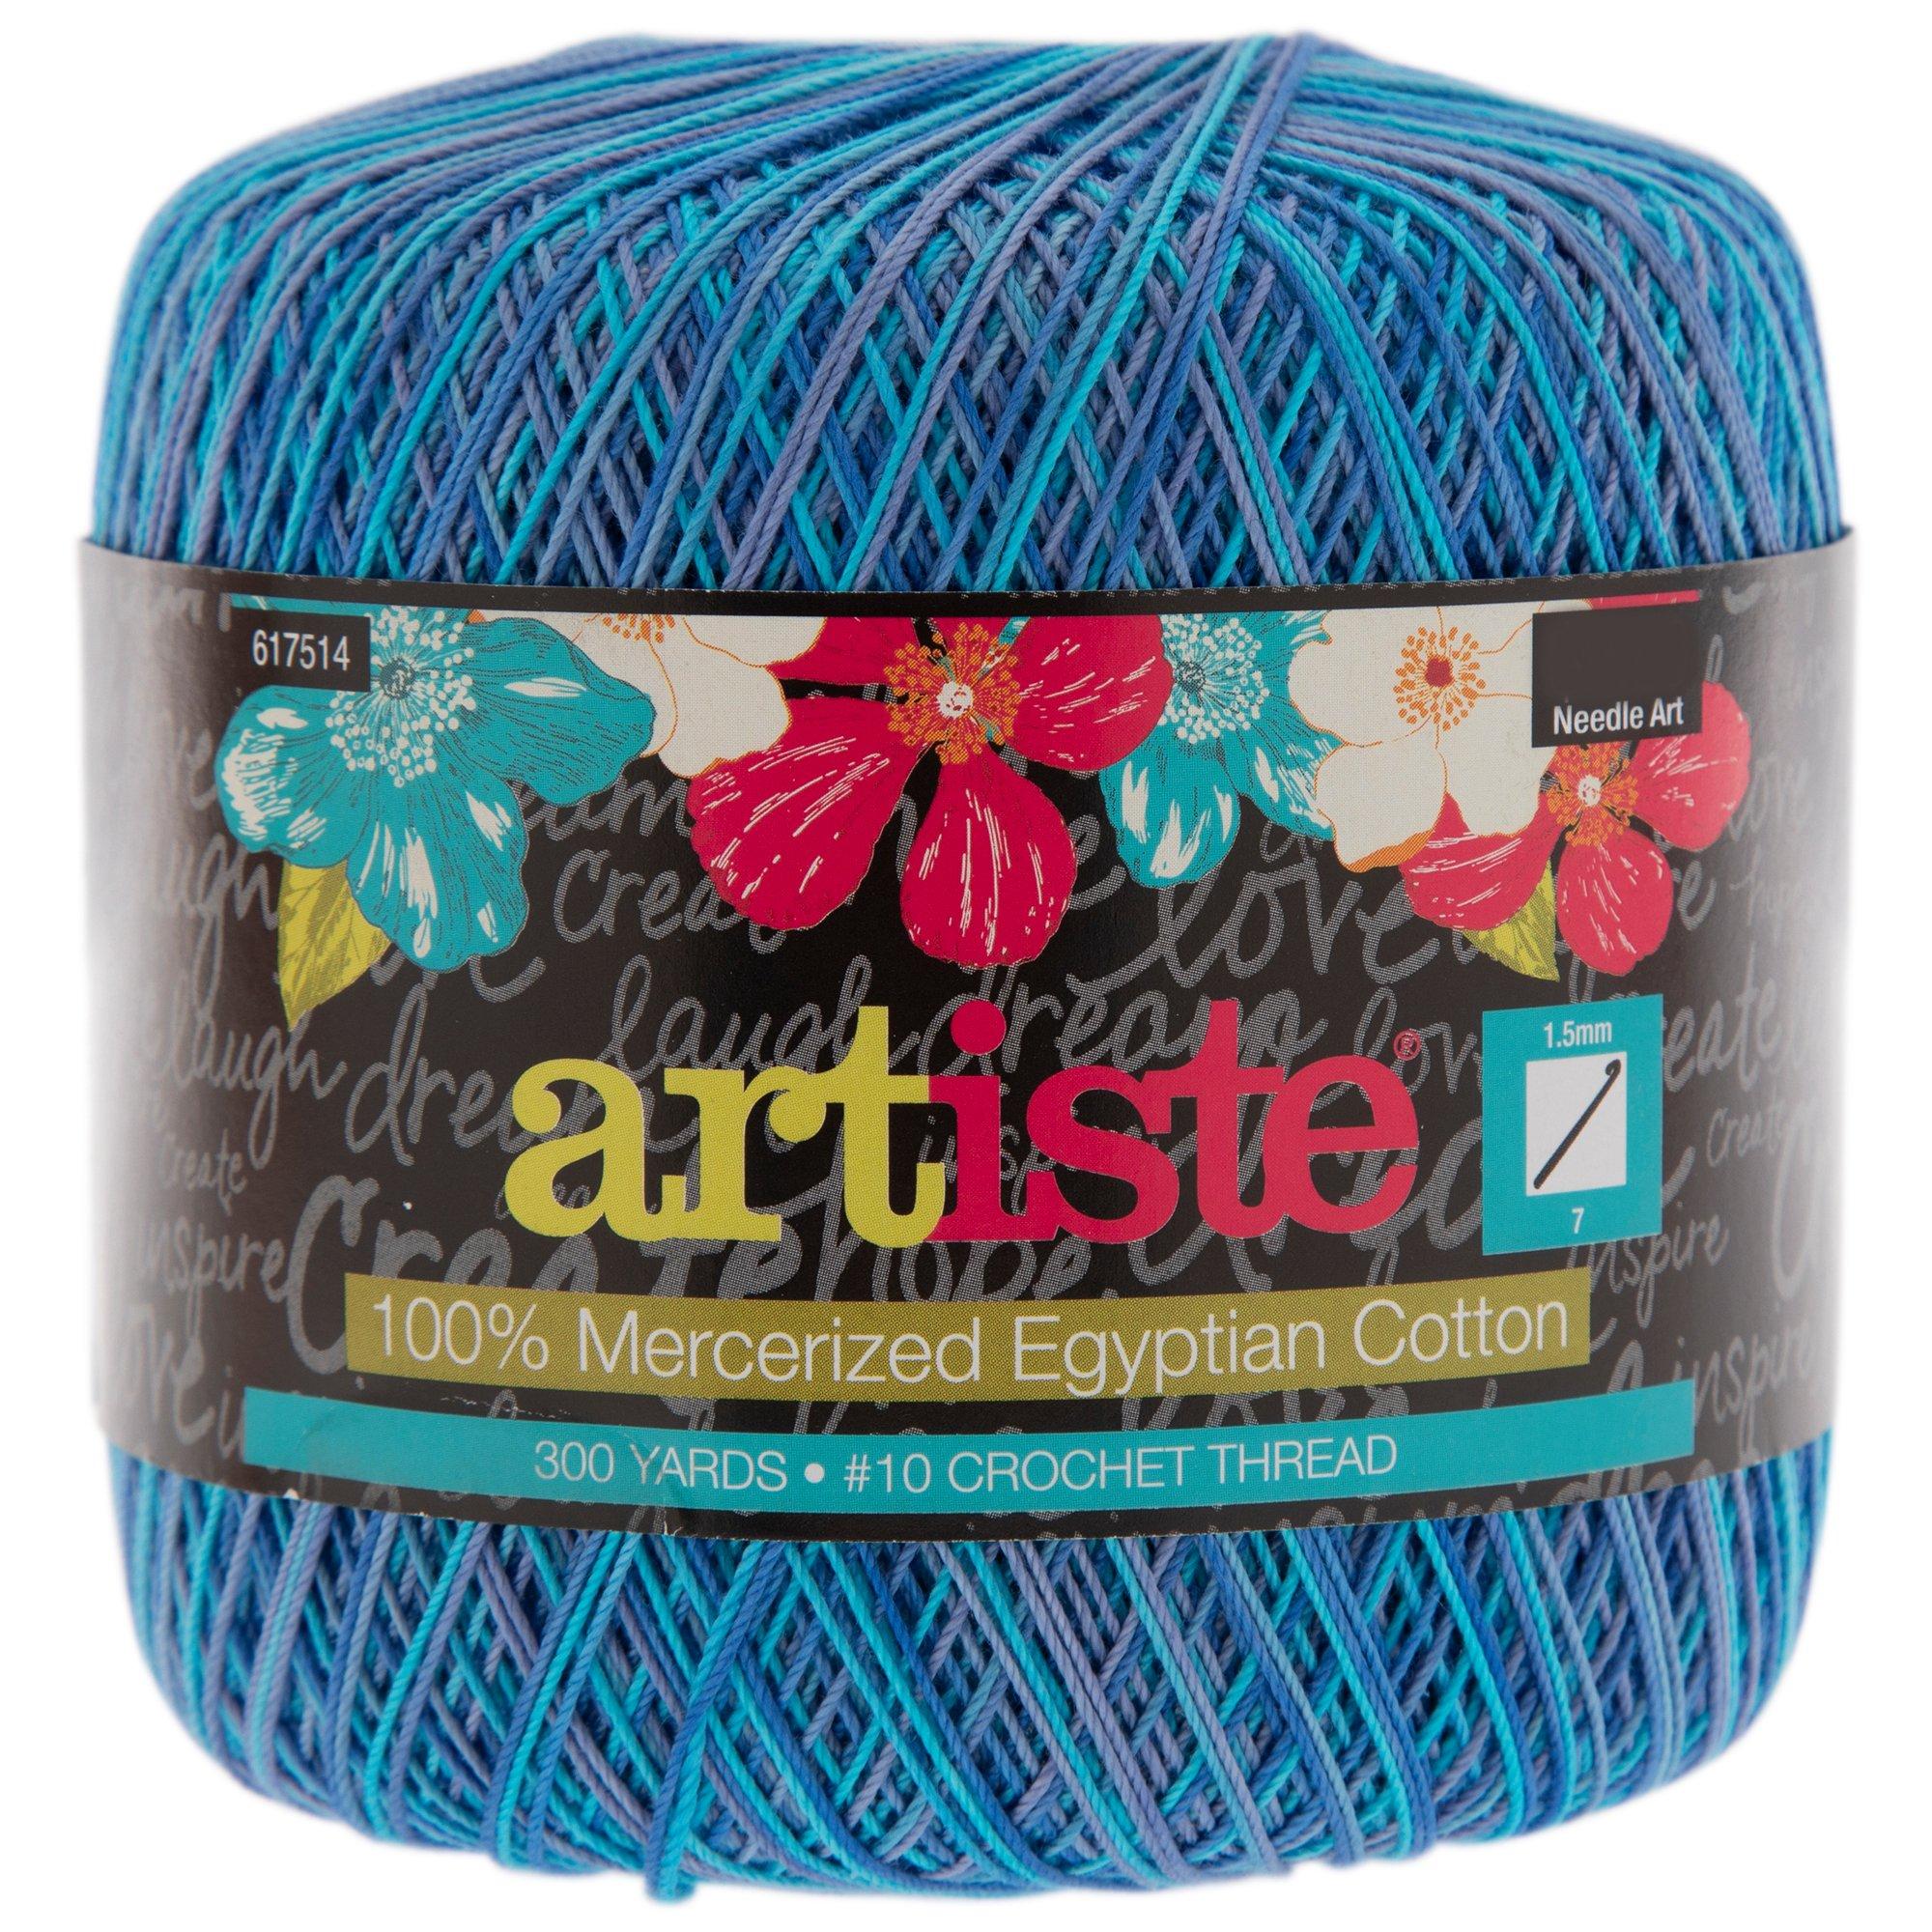 KCS 25 M/Skein Mercerized Pearl Cotton Crochet Needlepoint Thread,Size 5,6  skeins,Mixed Color 01